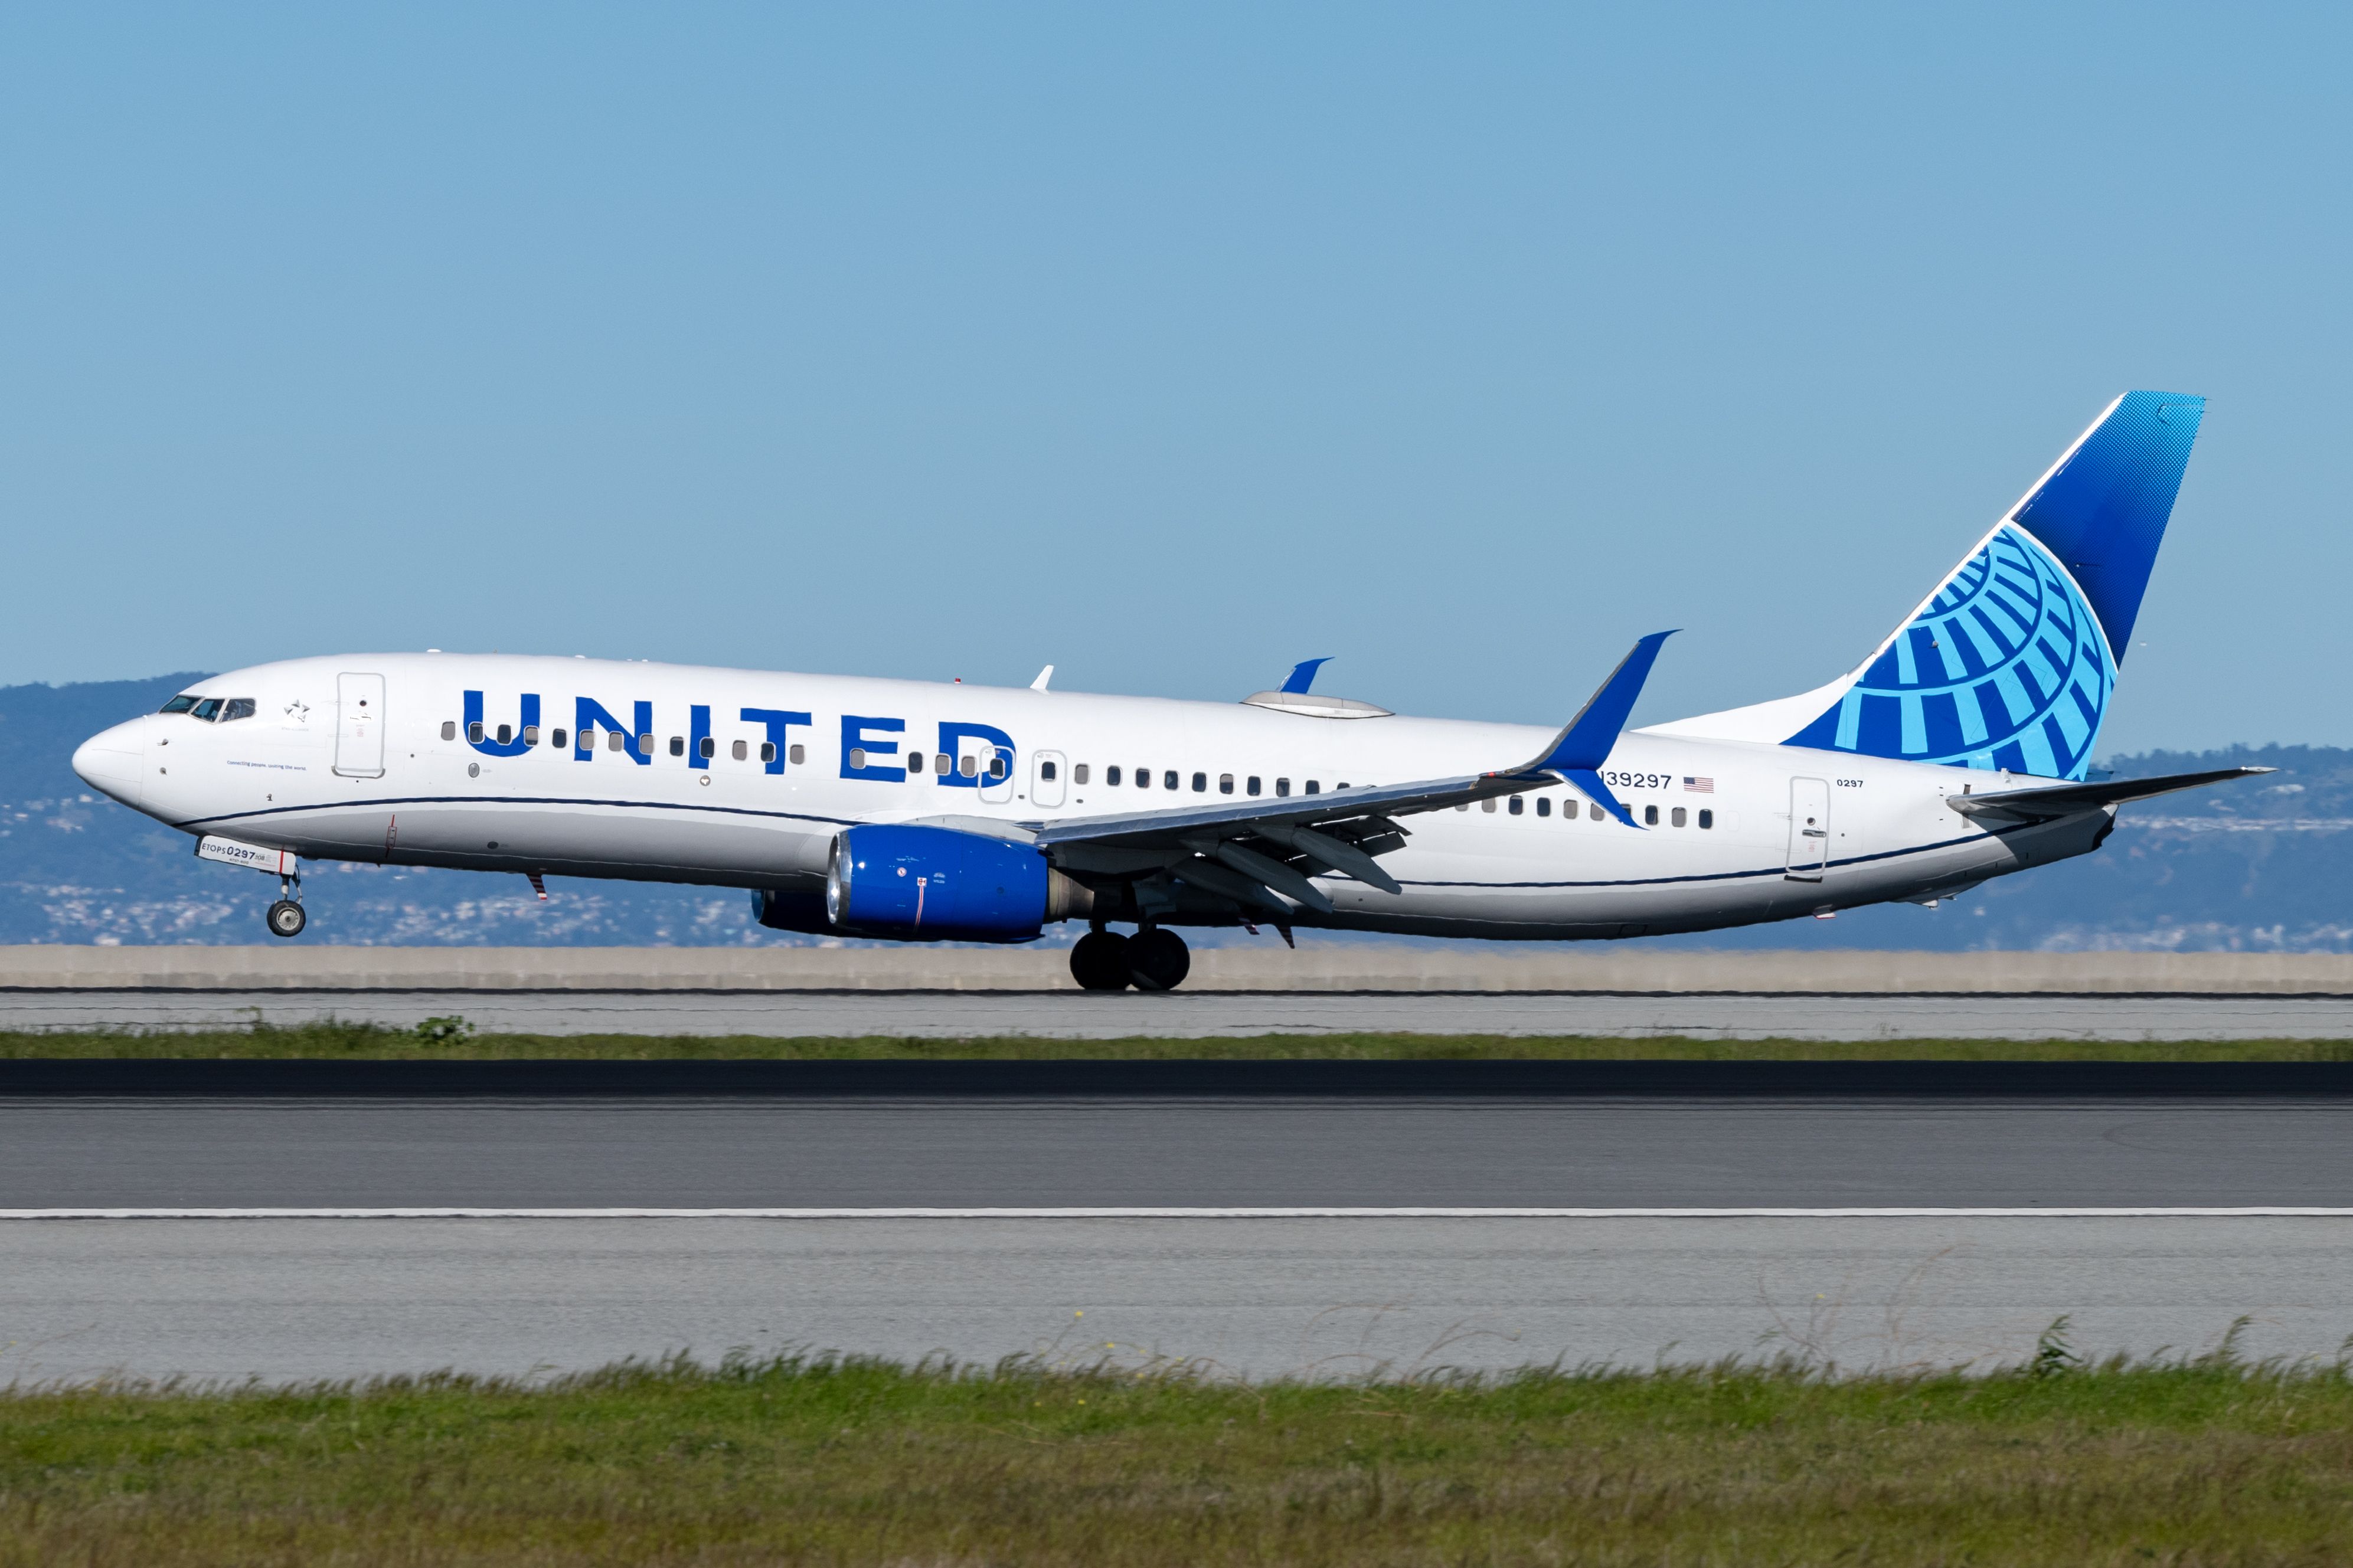 A United Airlines Boeing 737-800 just taking off.